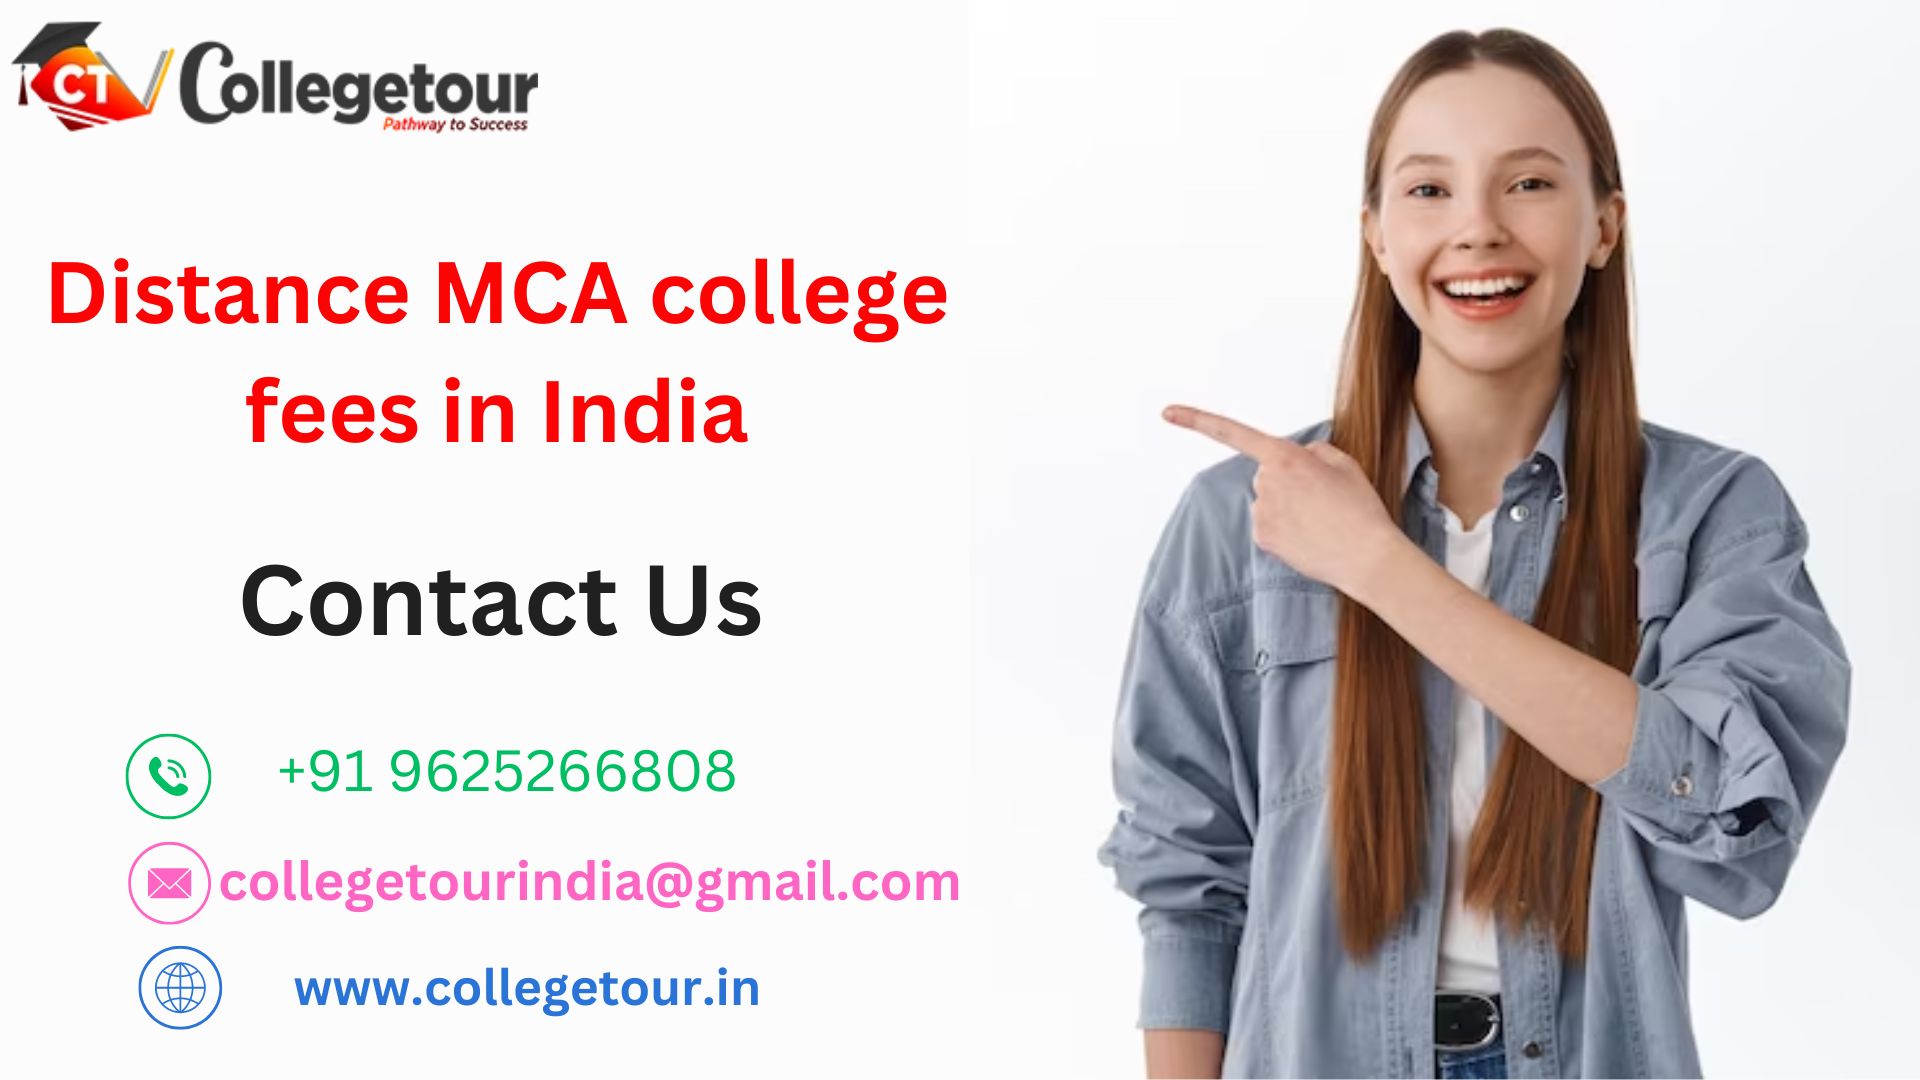 Distance MCA college fees in India